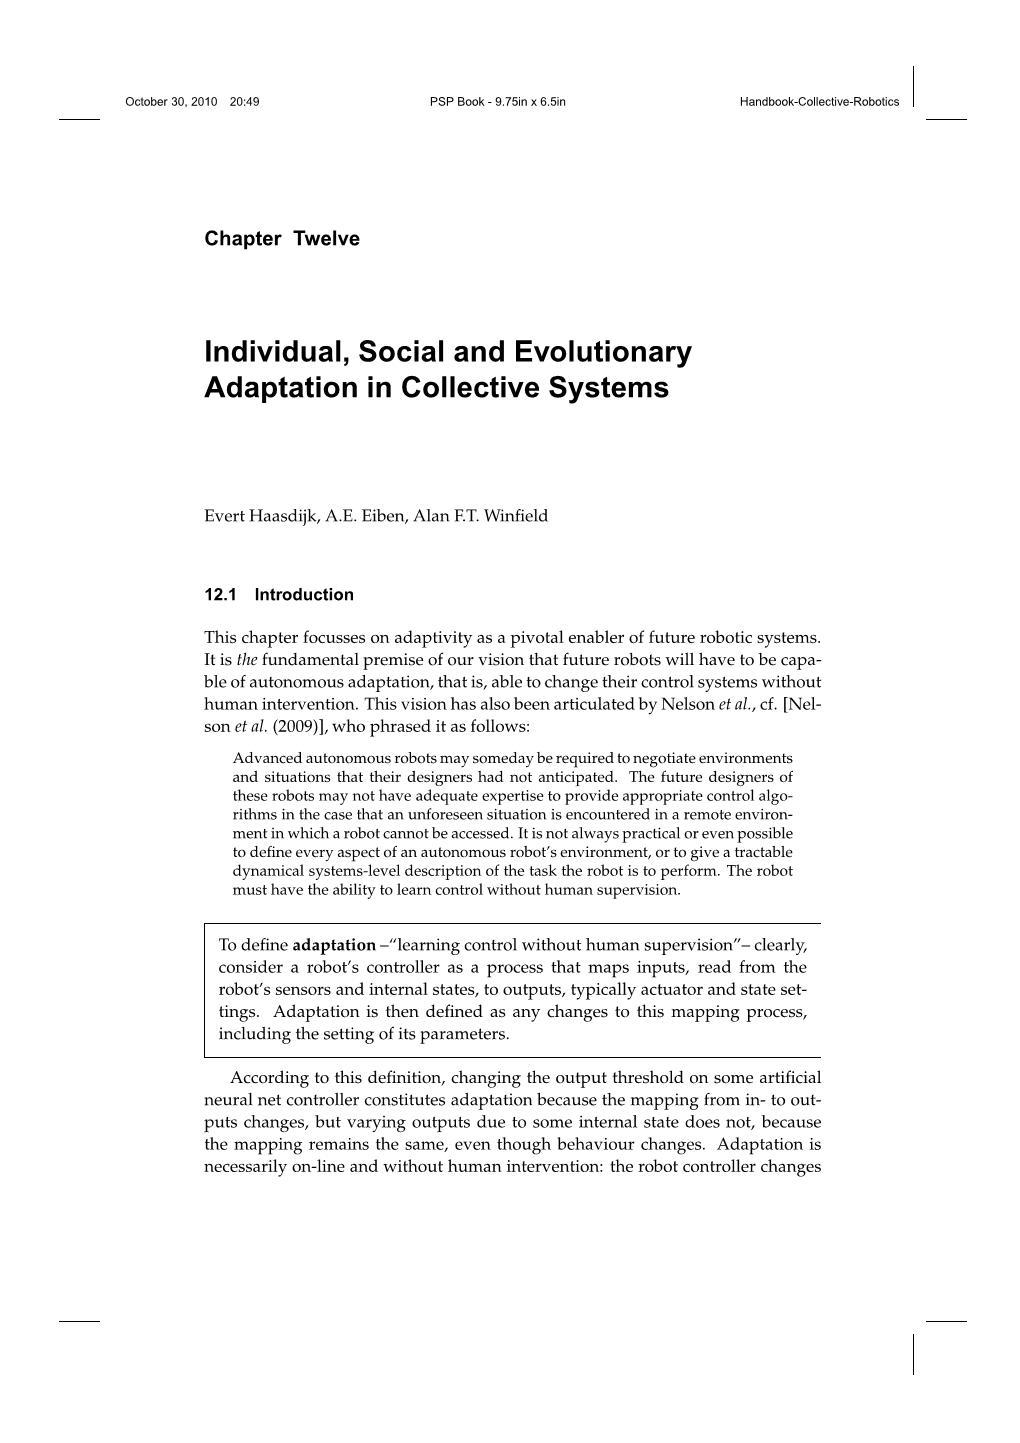 Individual, Social and Evolutionary Adaptation in Collective Systems